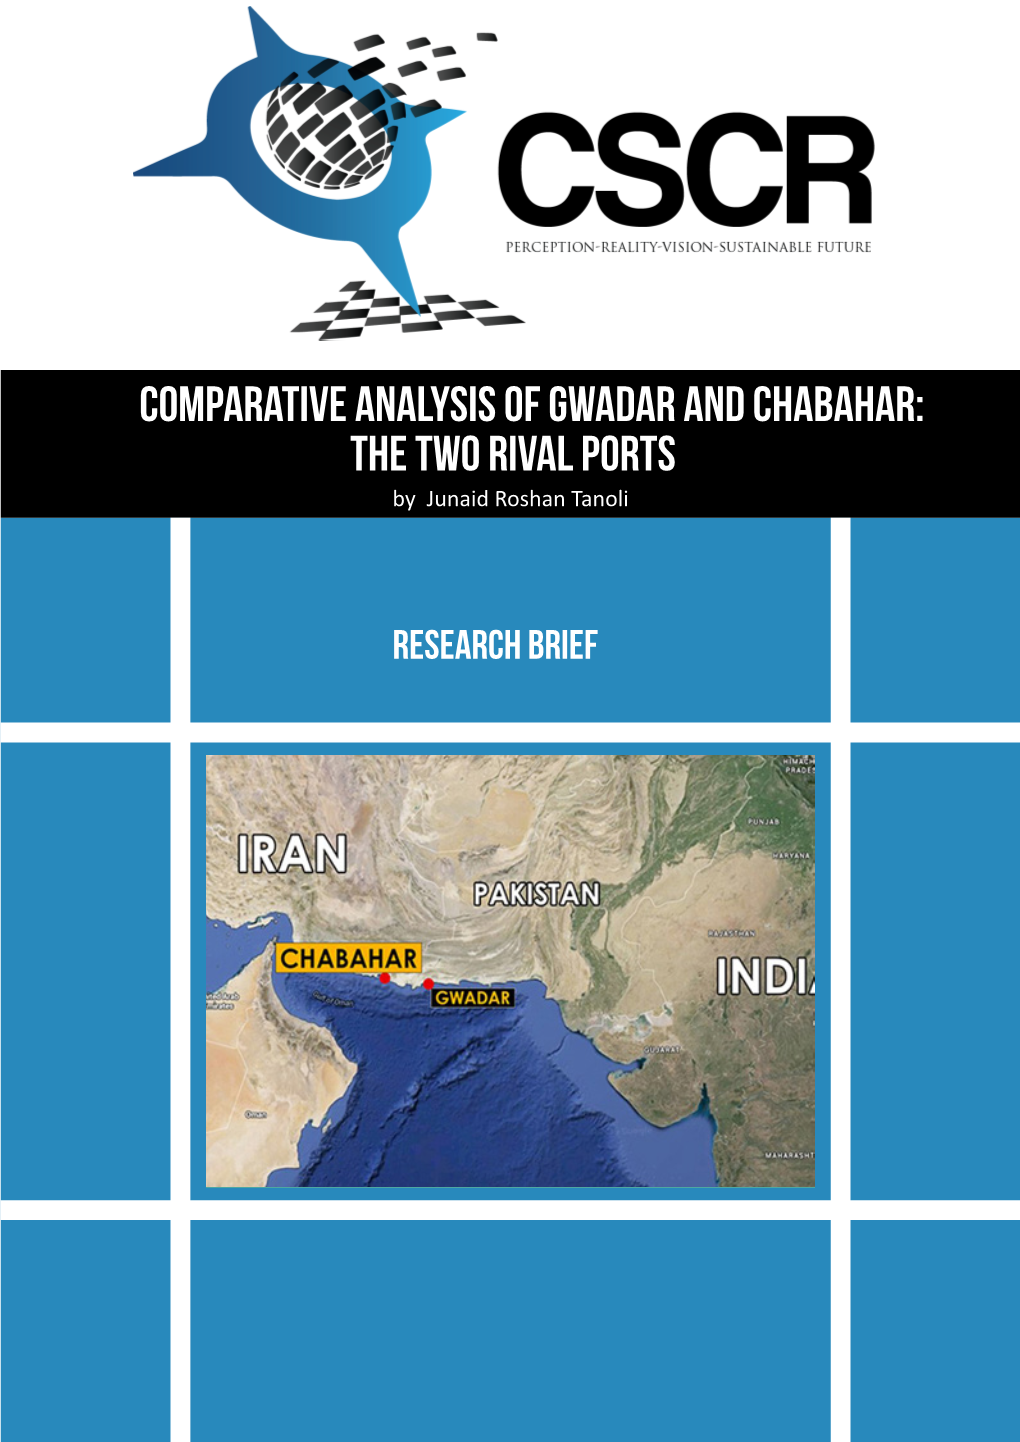 Comparative Analysis of Gwadar and Chabahar: the Two Rival Ports by Junaid Roshan Tanoli